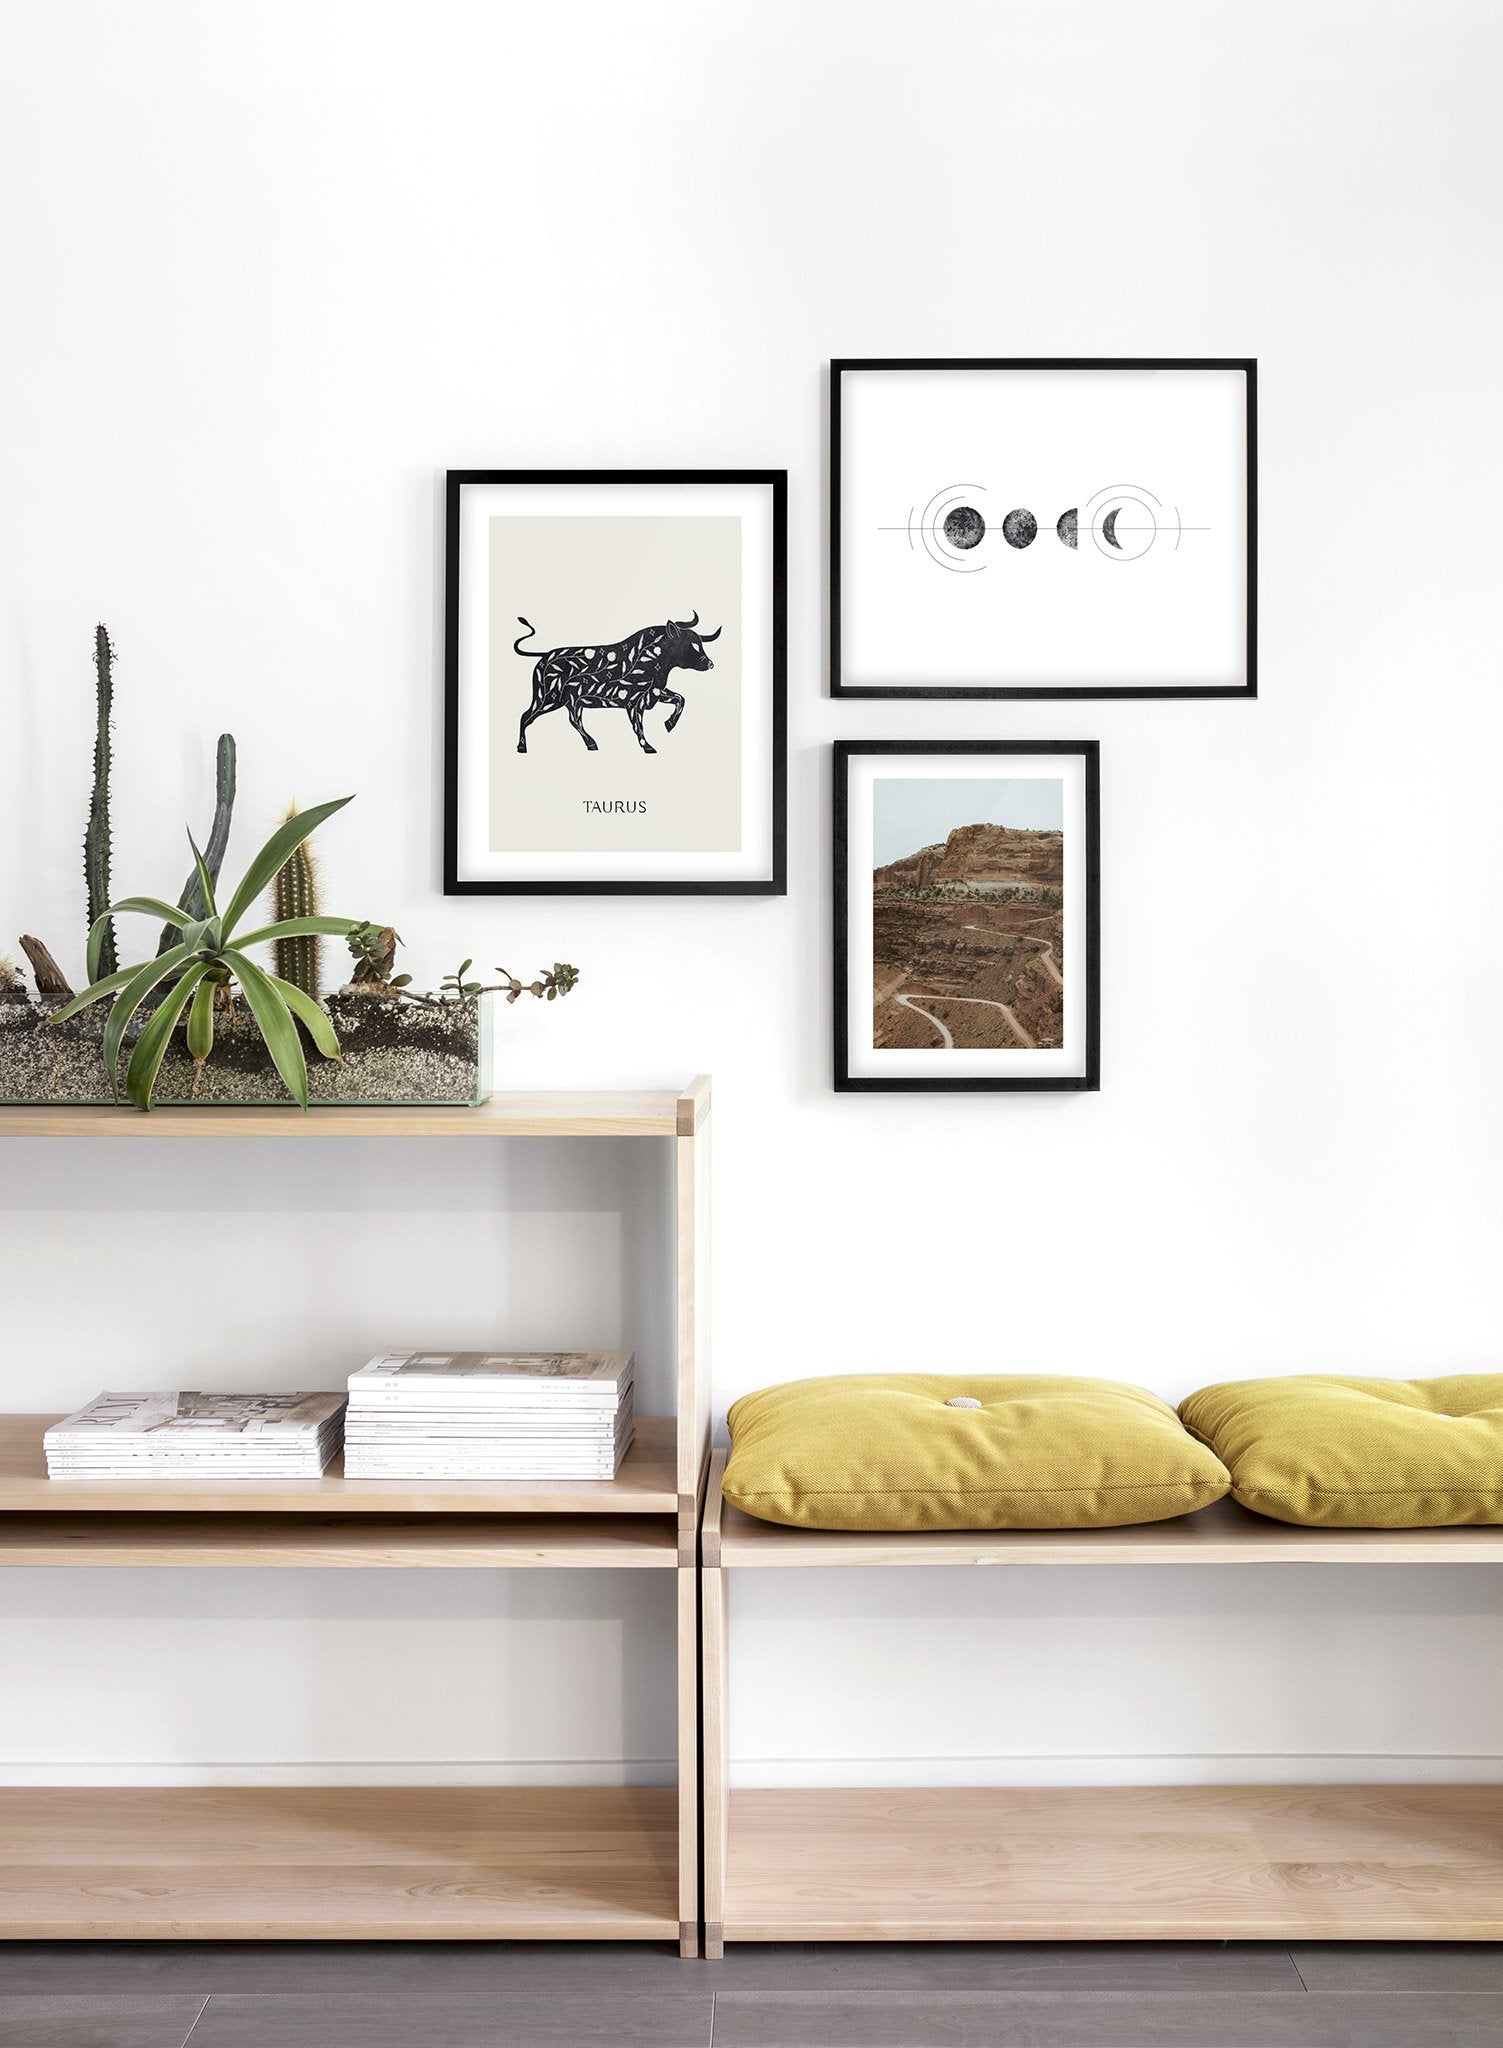 Celestial illustration poster by Opposite Wall with horoscope zodiac Taurus - Lifestyle Trio - Living Room